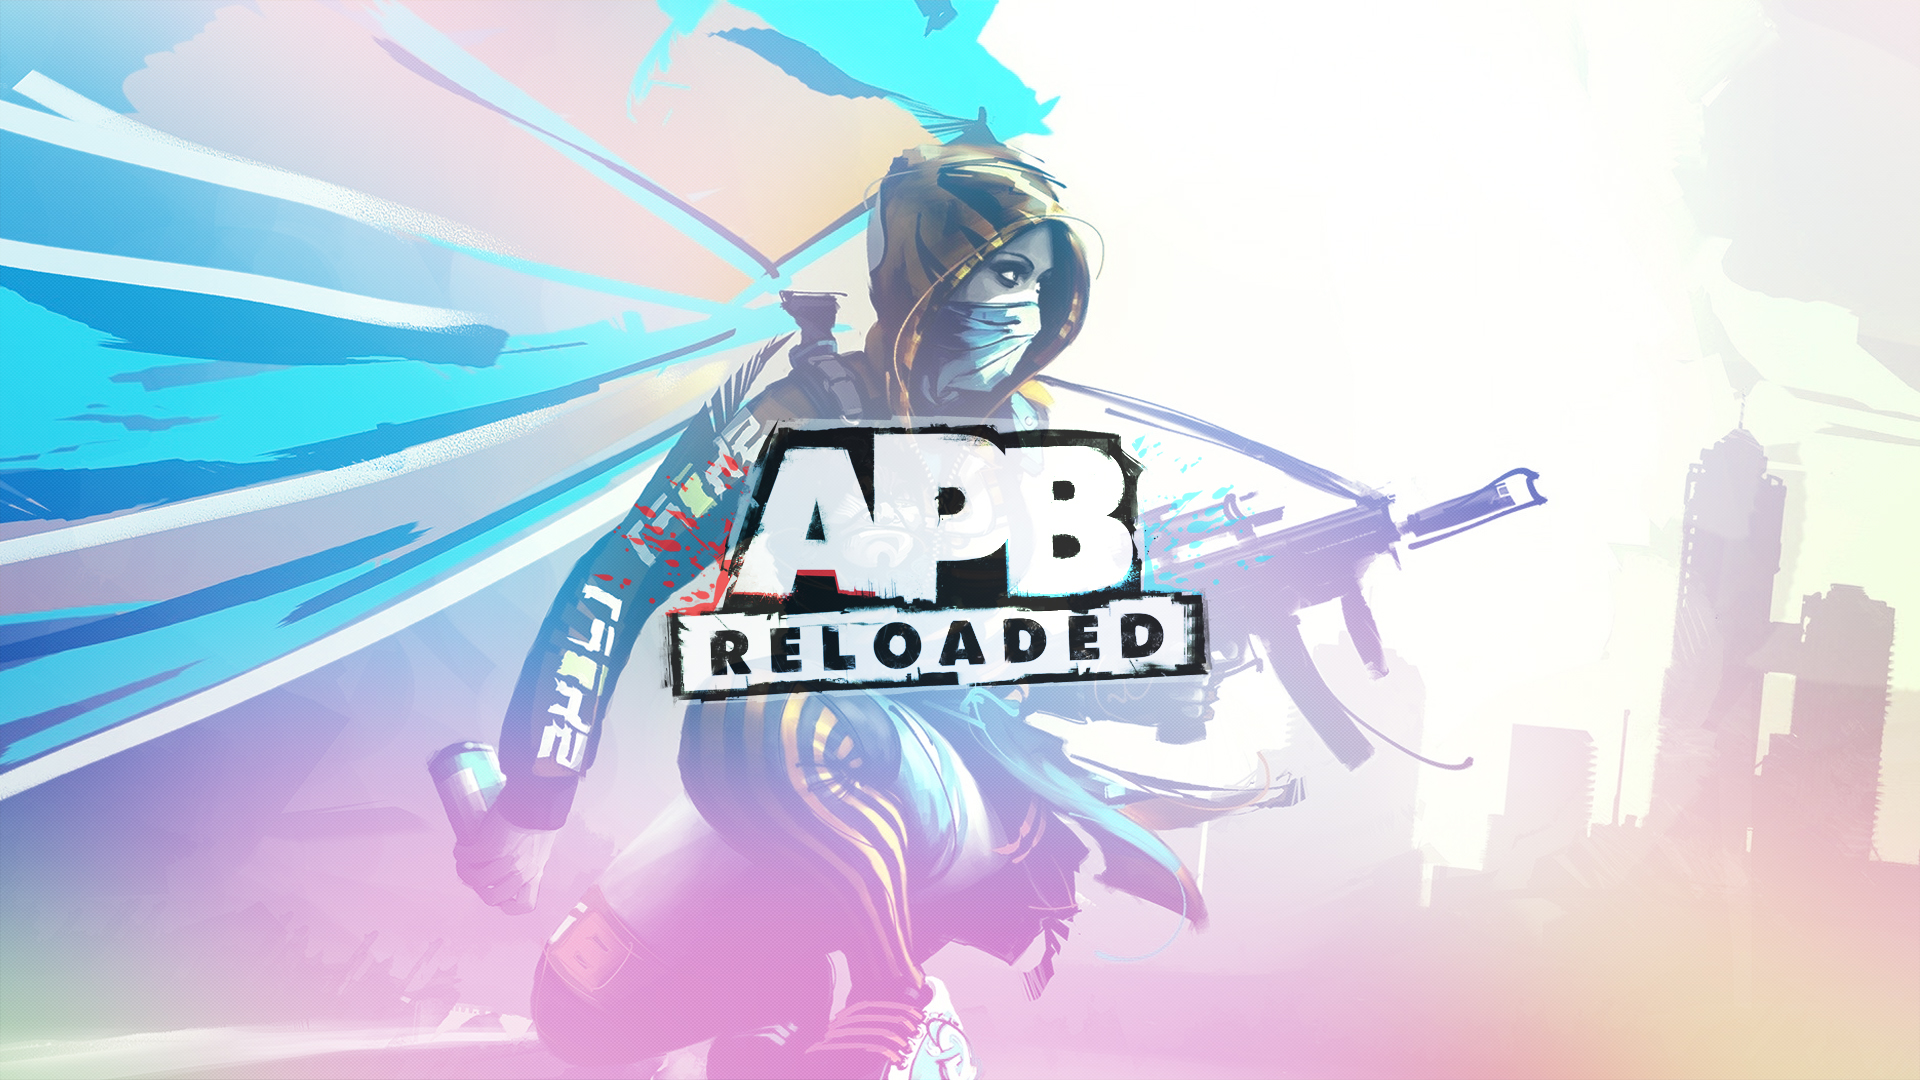 Apb reloaded for steam фото 86